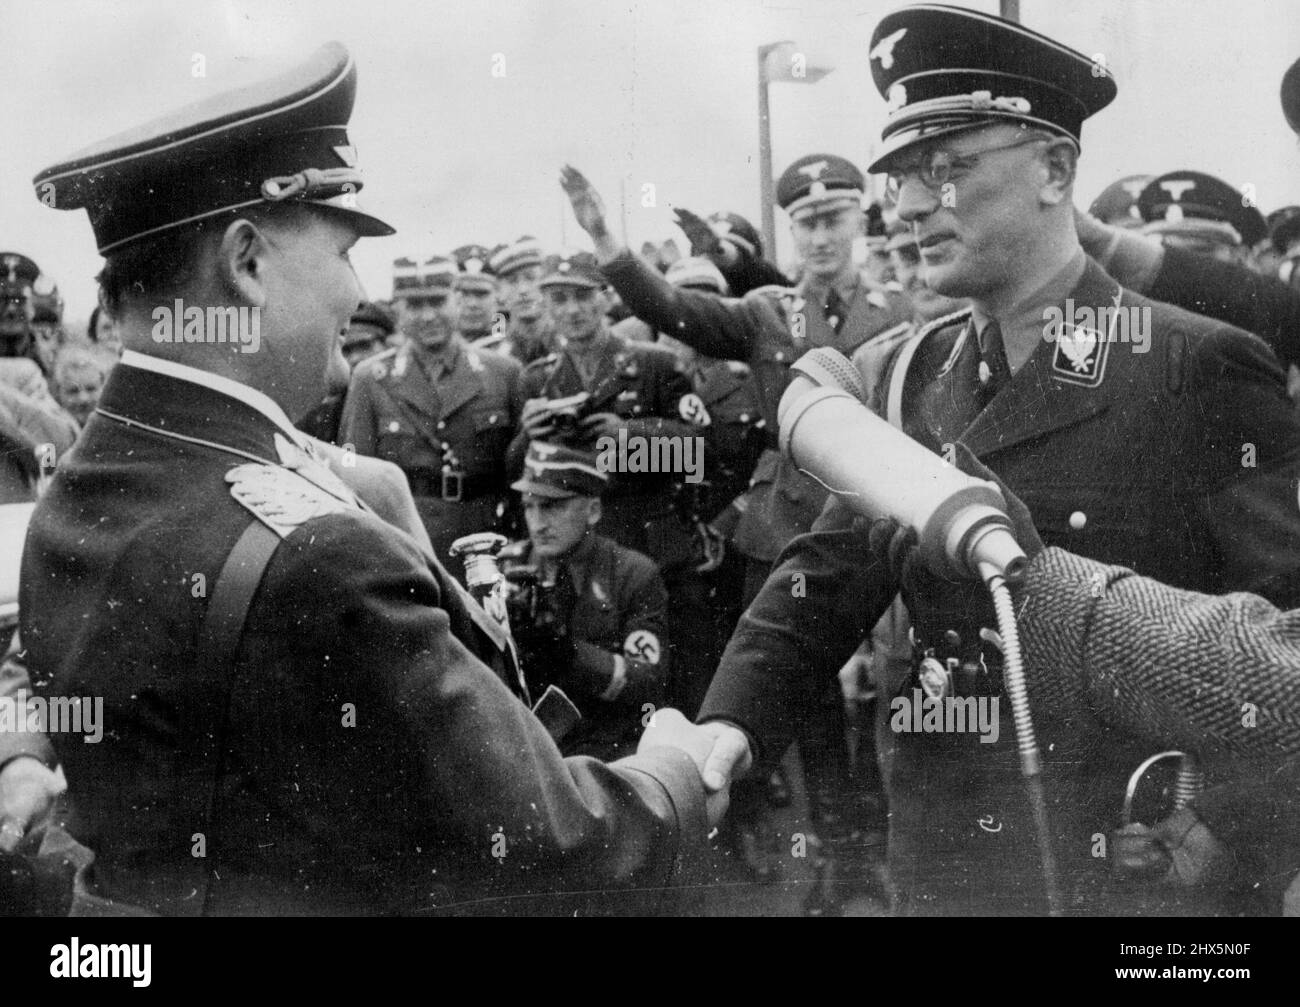 Goering Arrives In Vienna. On arrival at the Rew Reighs ***** in Vienna, Field Marshal Goering is greeted by Dr. Seyss-Inquart, Governor of Austria. Goering is taking part in a ***** campaign in Austria. March 1, 1938. (Photo by Keystone). Stock Photo